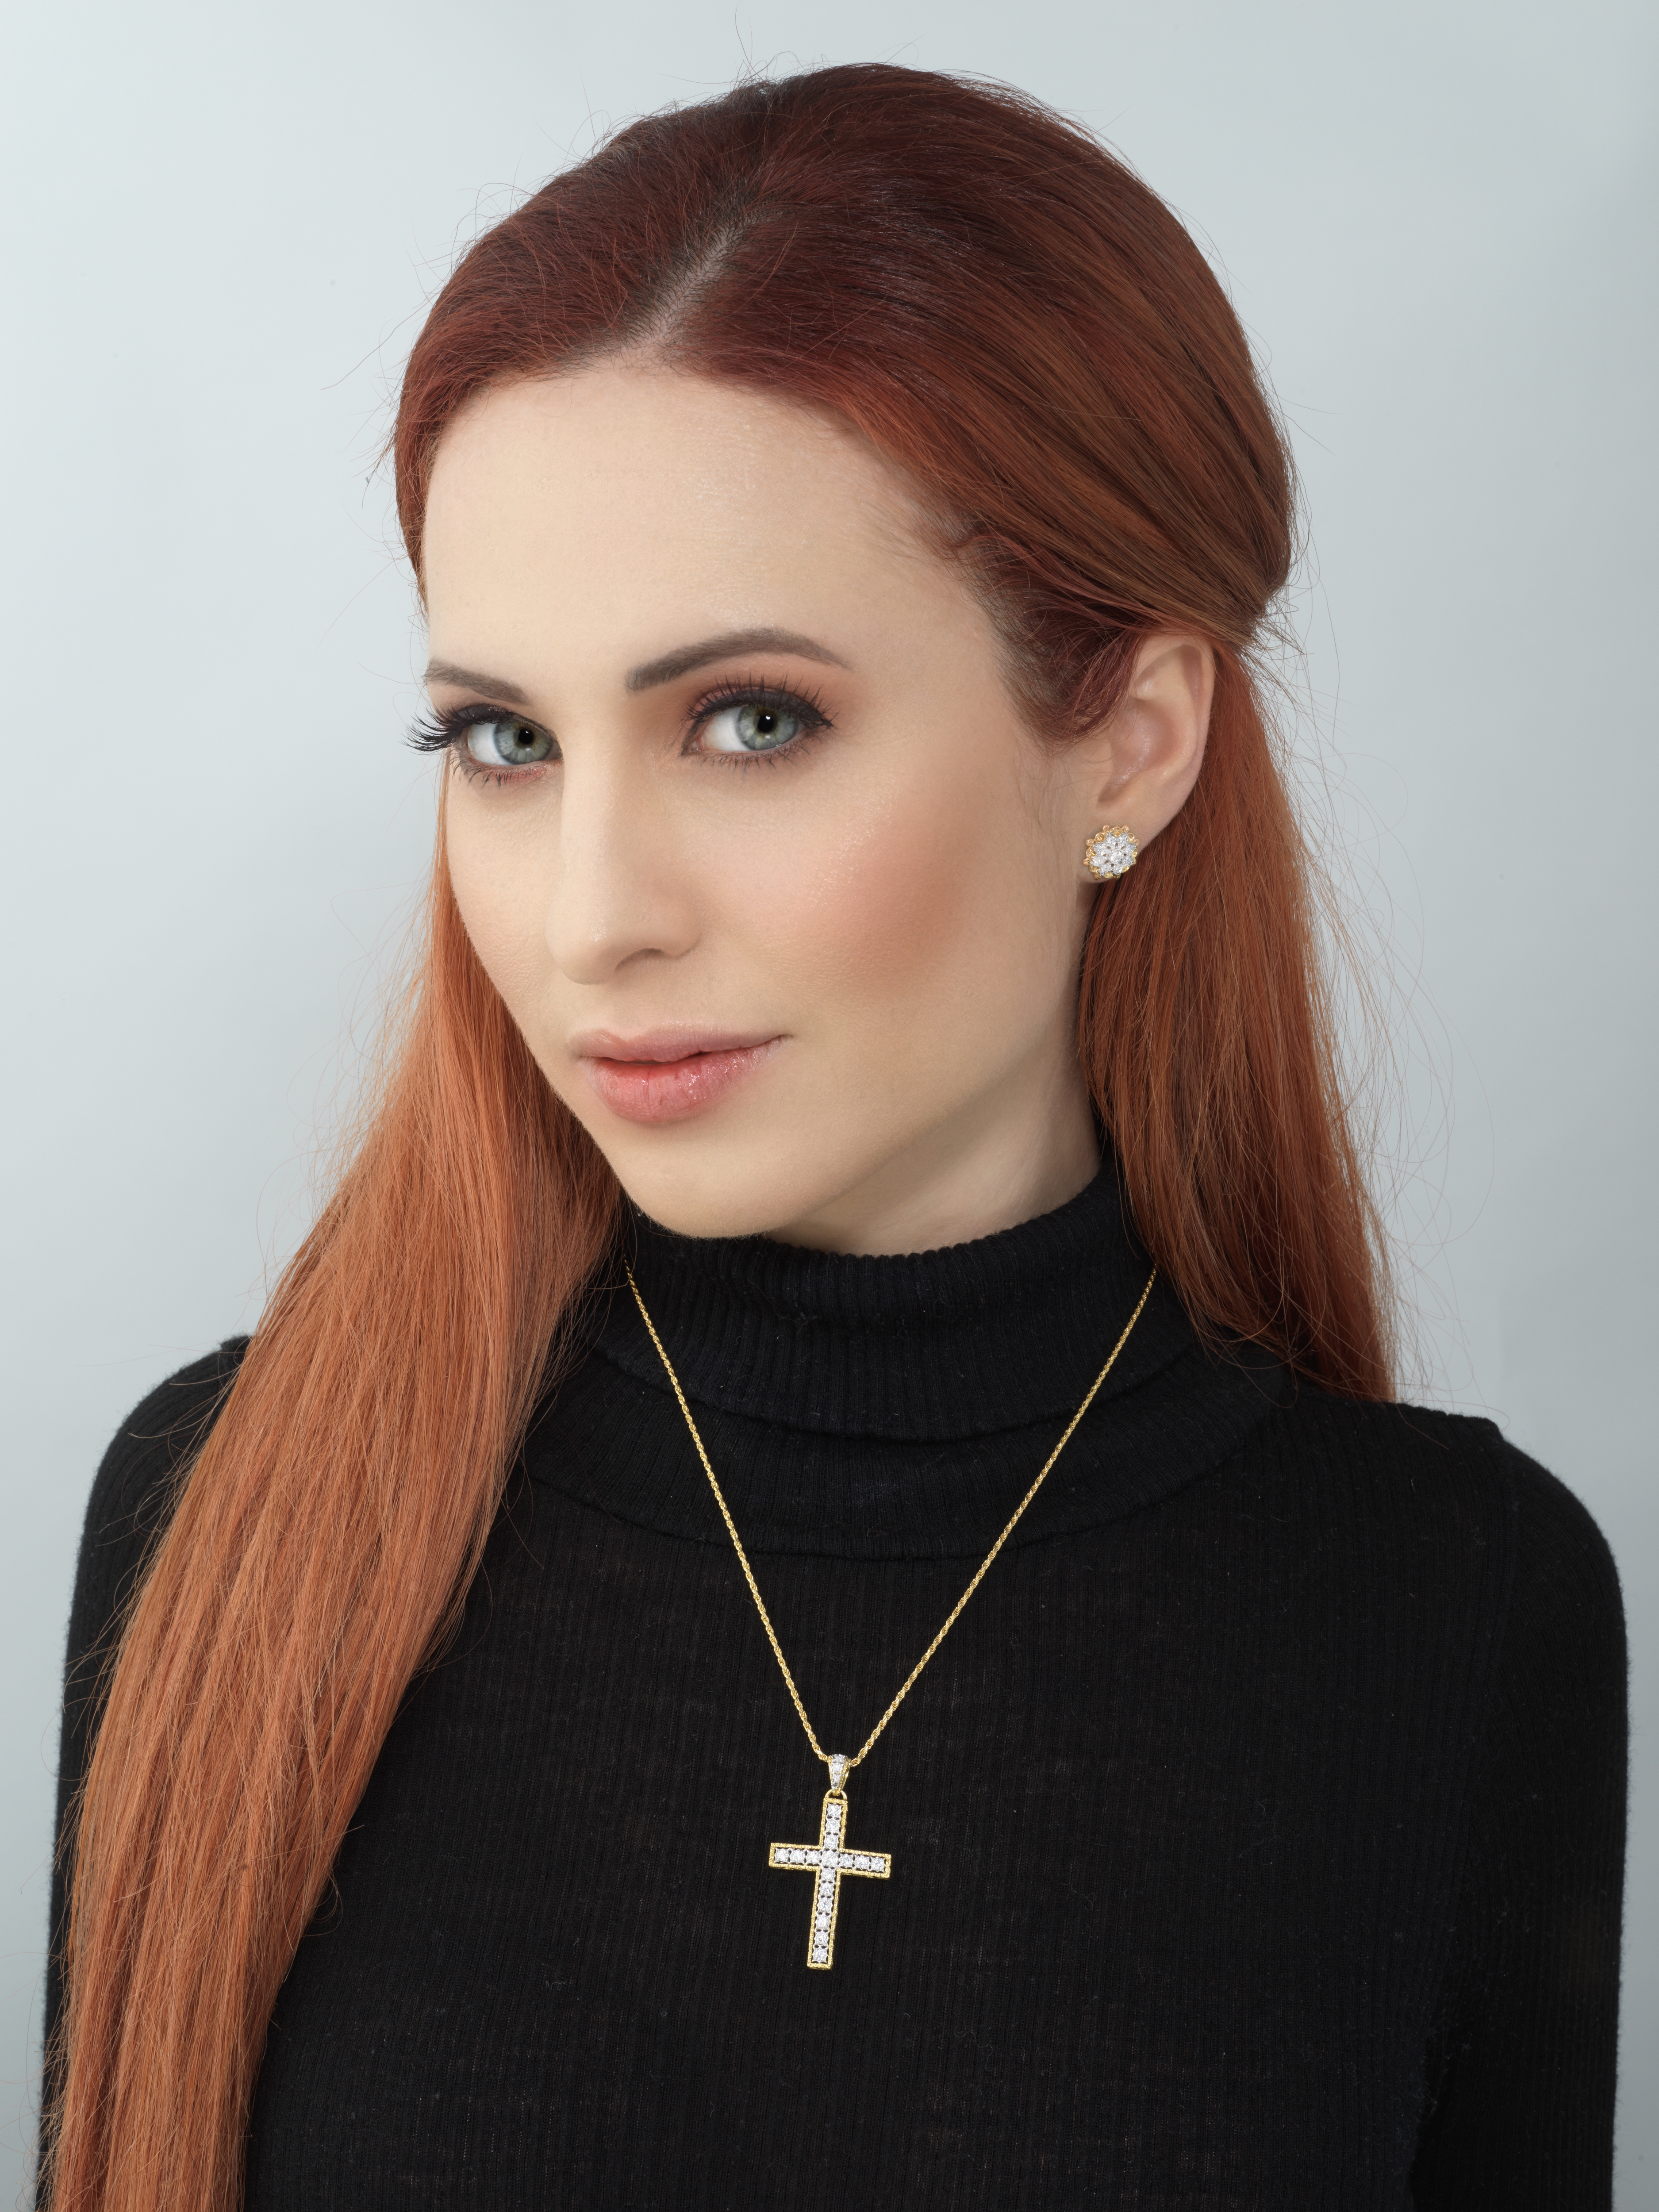 Florentine renaissance inspired cross necklace in 18kt gold and